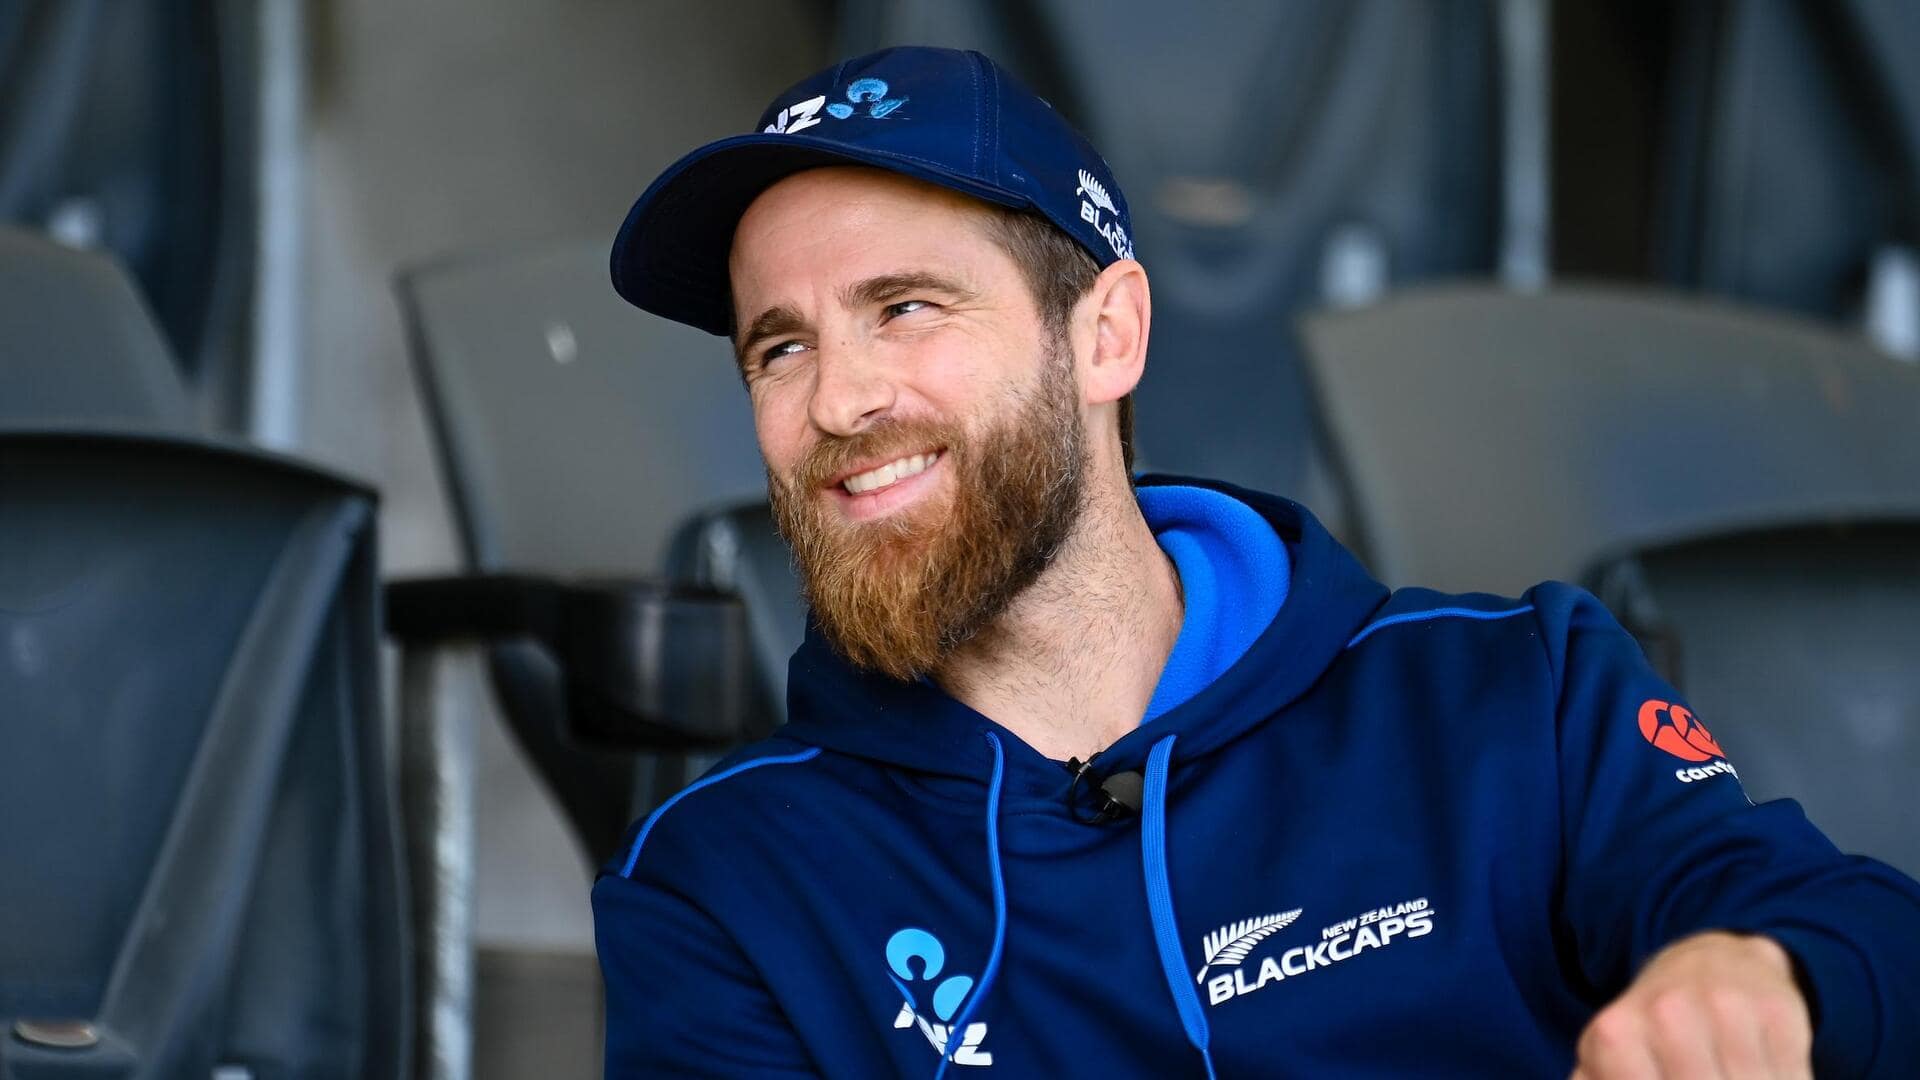 New Zealand's Kane Williamson plays his 100th Test: Key stats